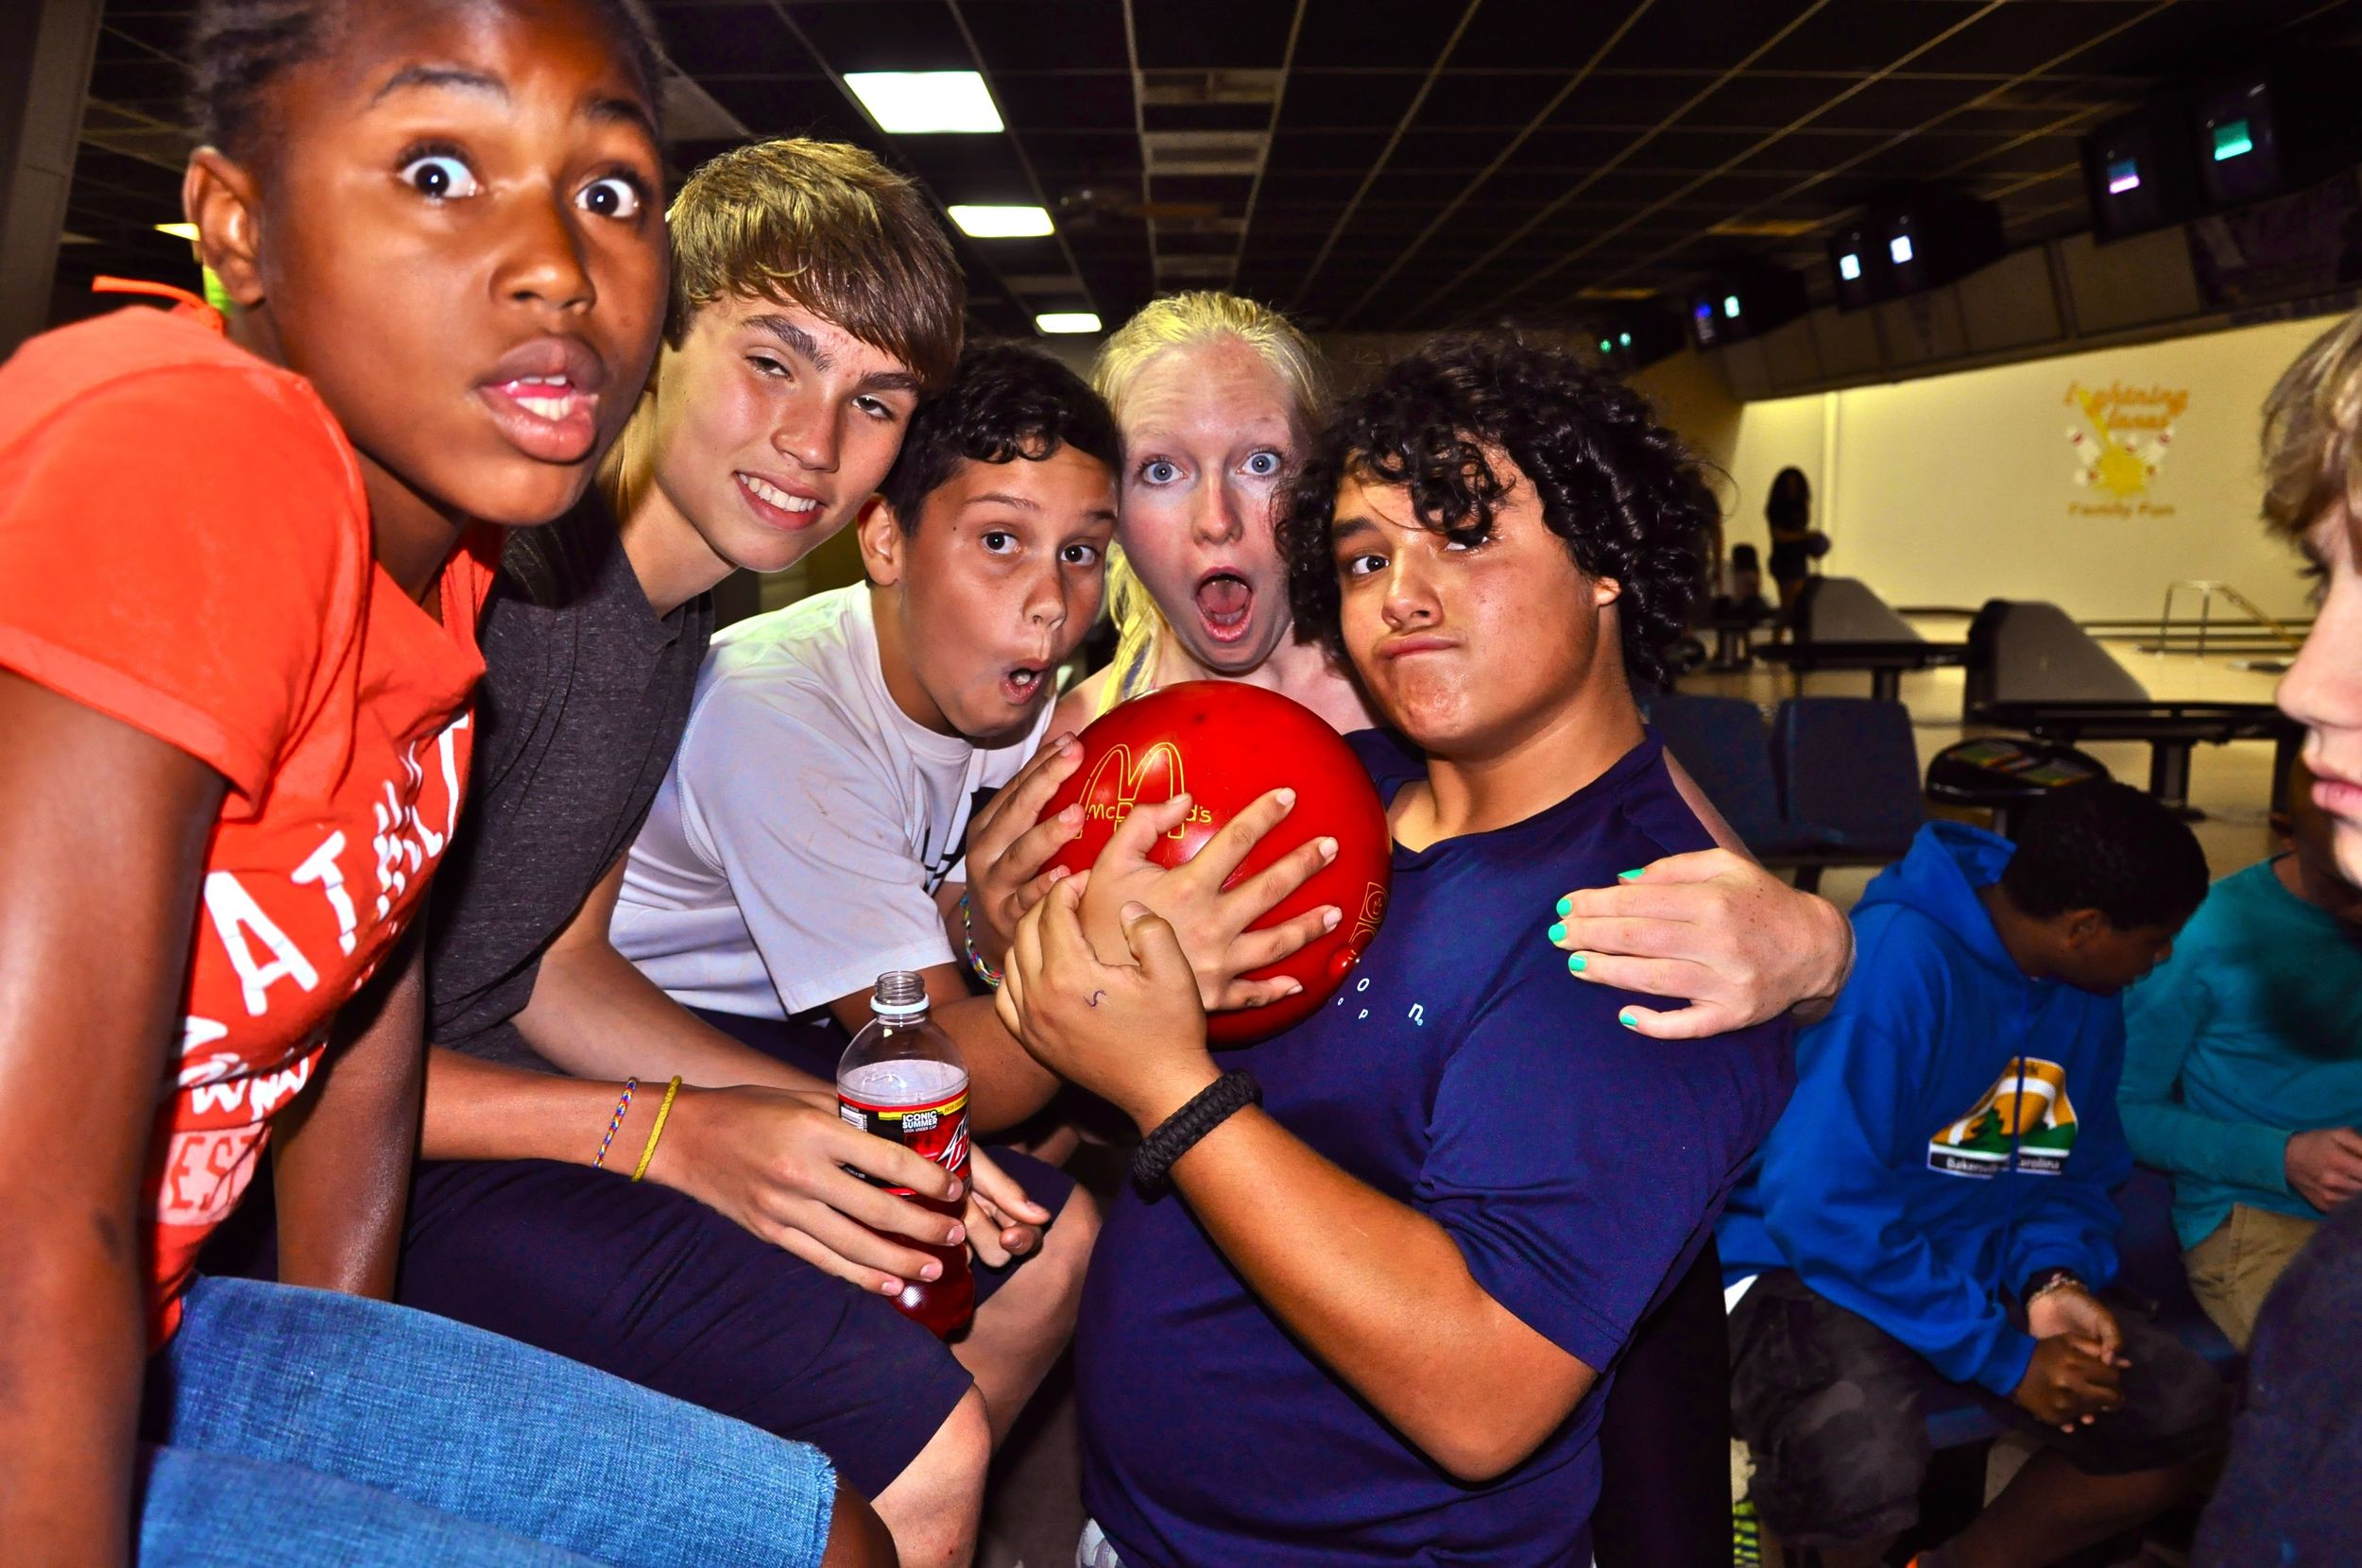 22woah-look-at-that-ball22-cynia-bruce-ethan-lilja-and-travis-have-some-fun-during-bowling.jpg